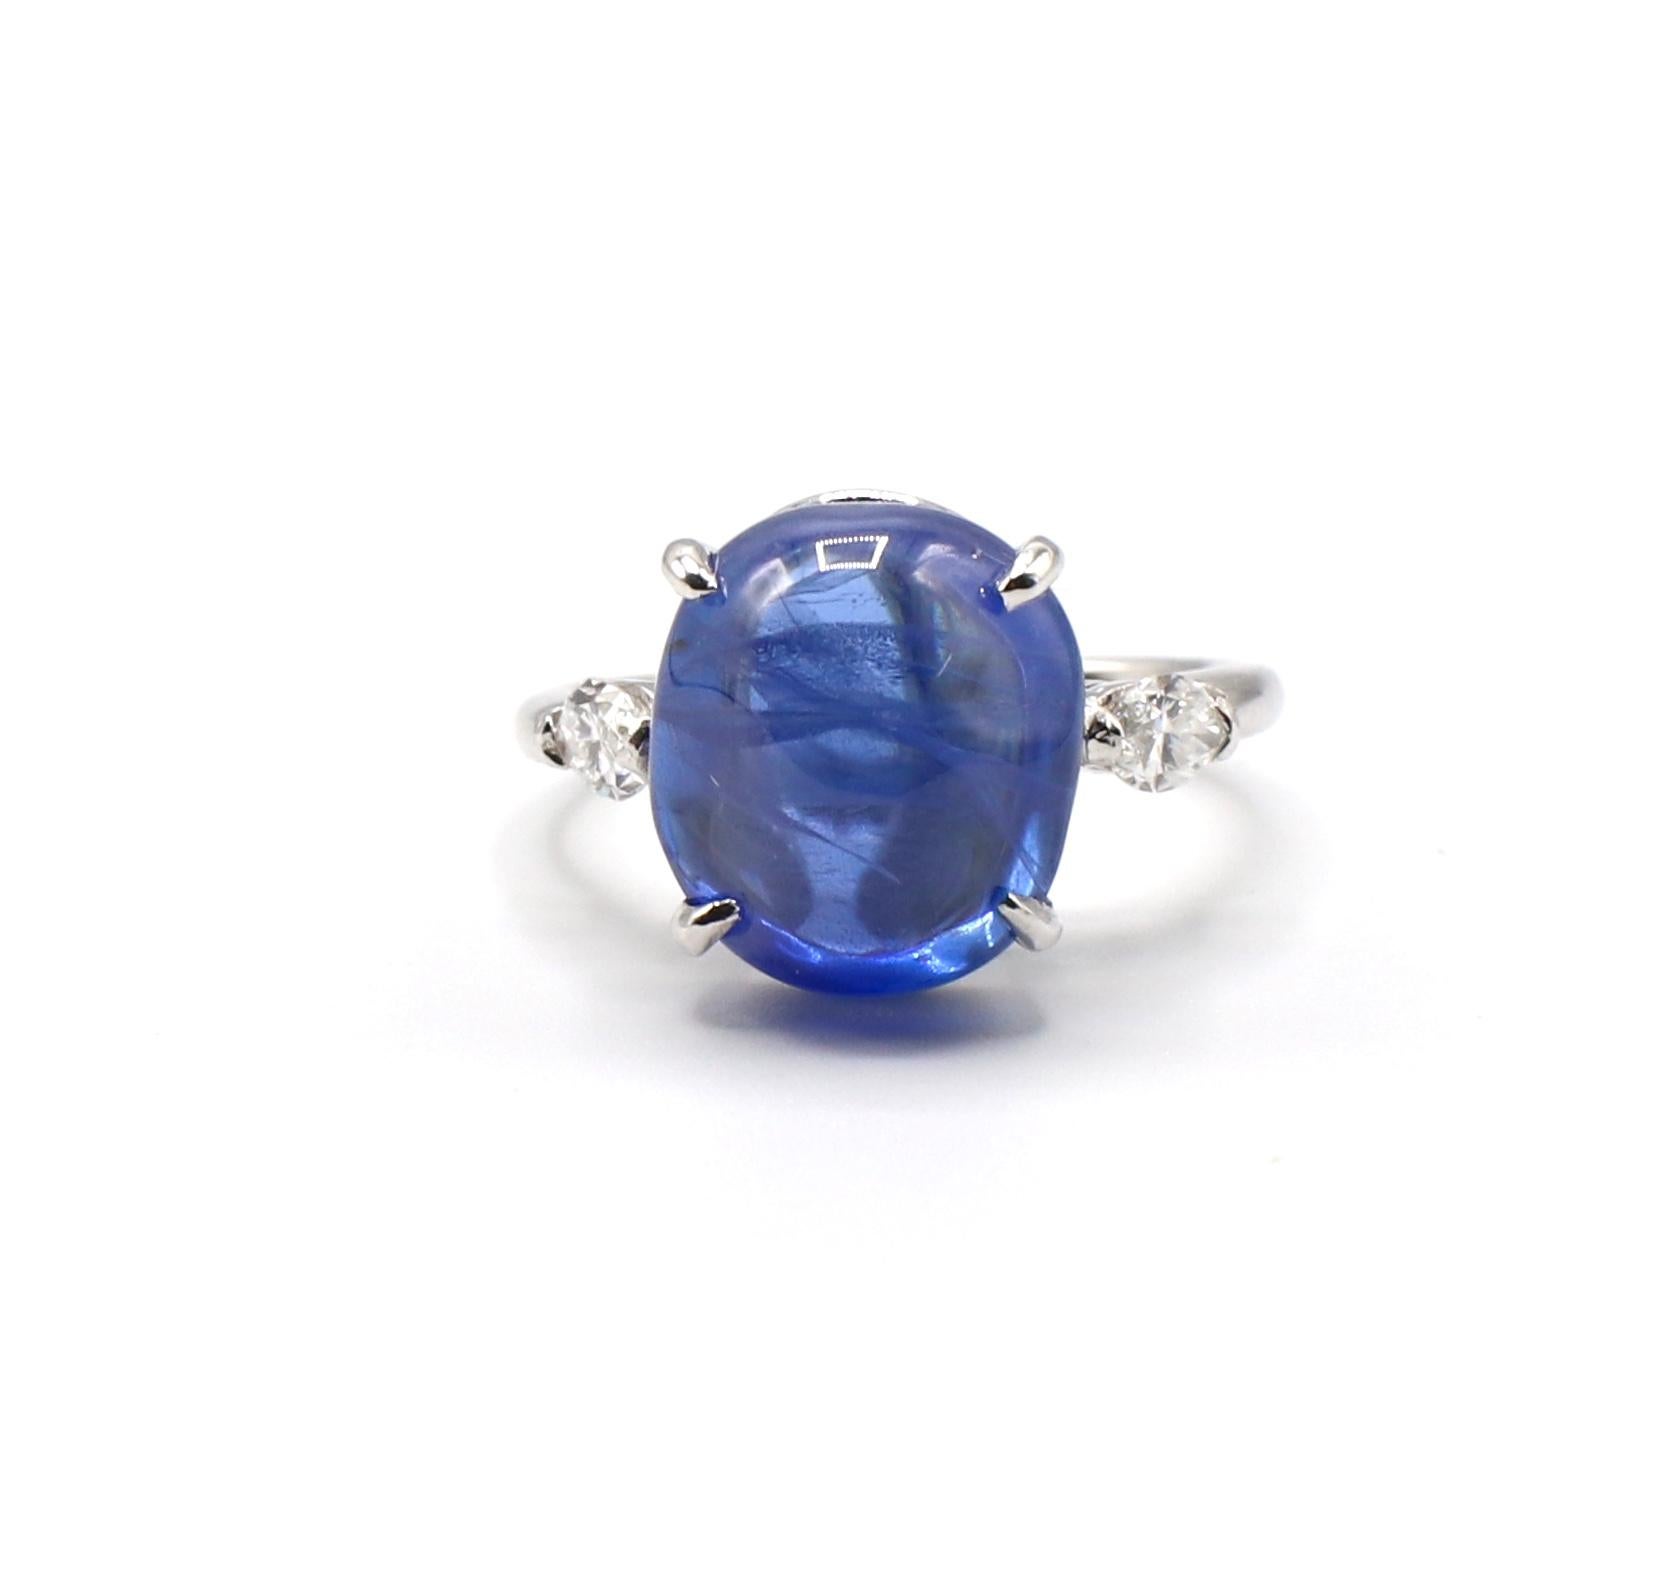 Platinum Blue Sapphire Cabochon & Diamond Cocktail Ring Size 5

Metal: Platinum
Weight: 4.65 grams
Diamonds: 2 marquise shaped diamonds, approx. .40 CTW G VS 
Sapphire: Cabochon/sugar loaf 11.3mm x 10.2mm x 6.5mm, approx. 5.25 cts
Band Thickness: